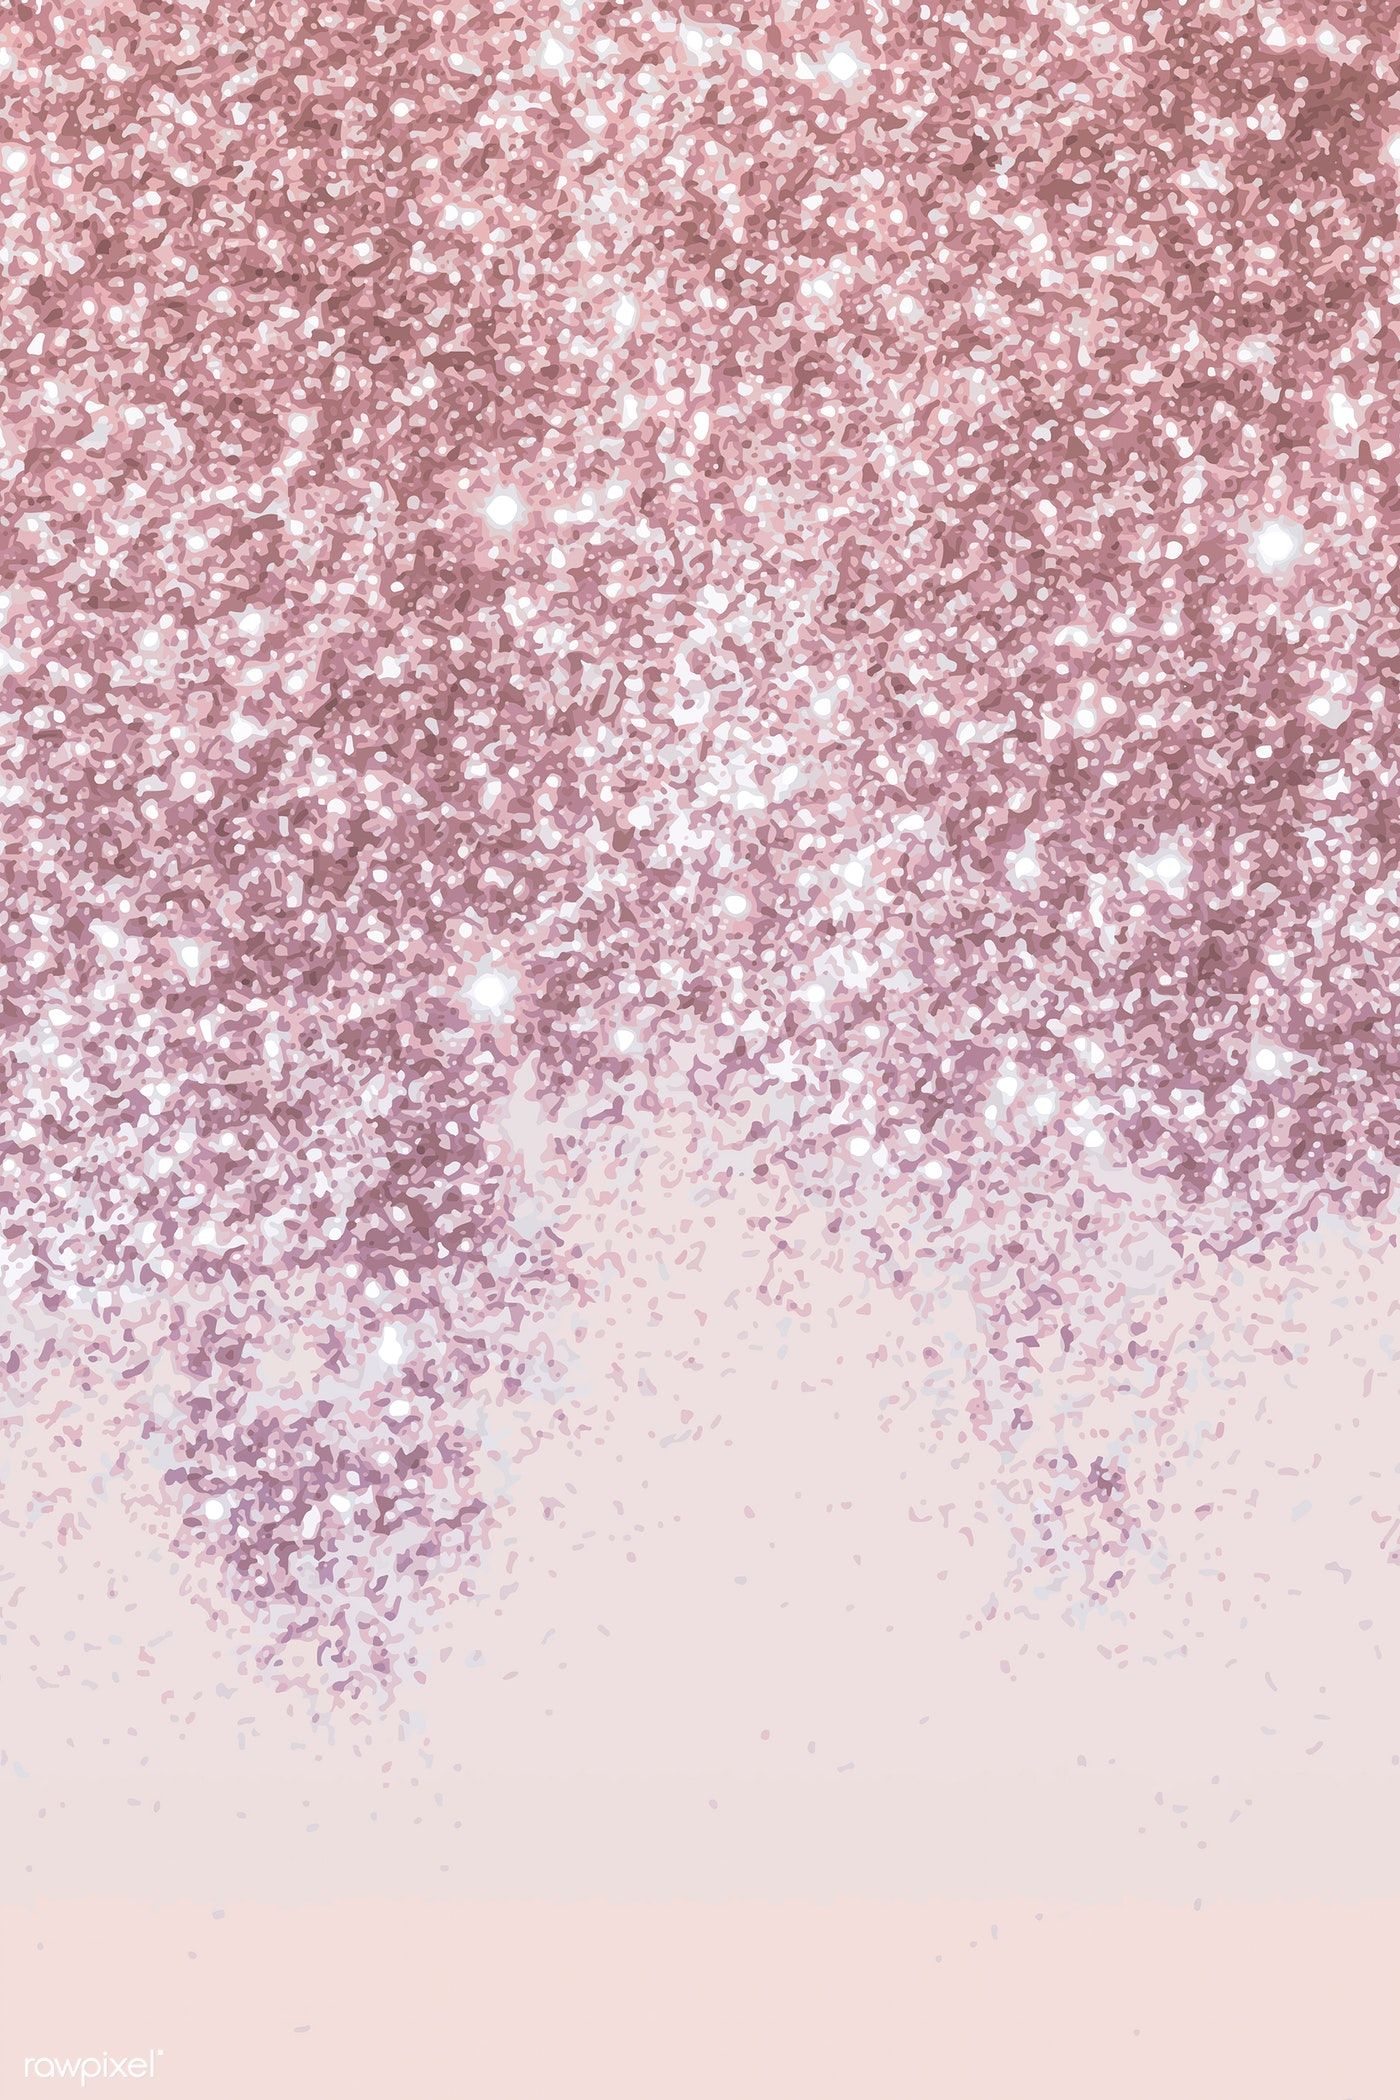 Download premium vector of Pink gold glittery pattern background